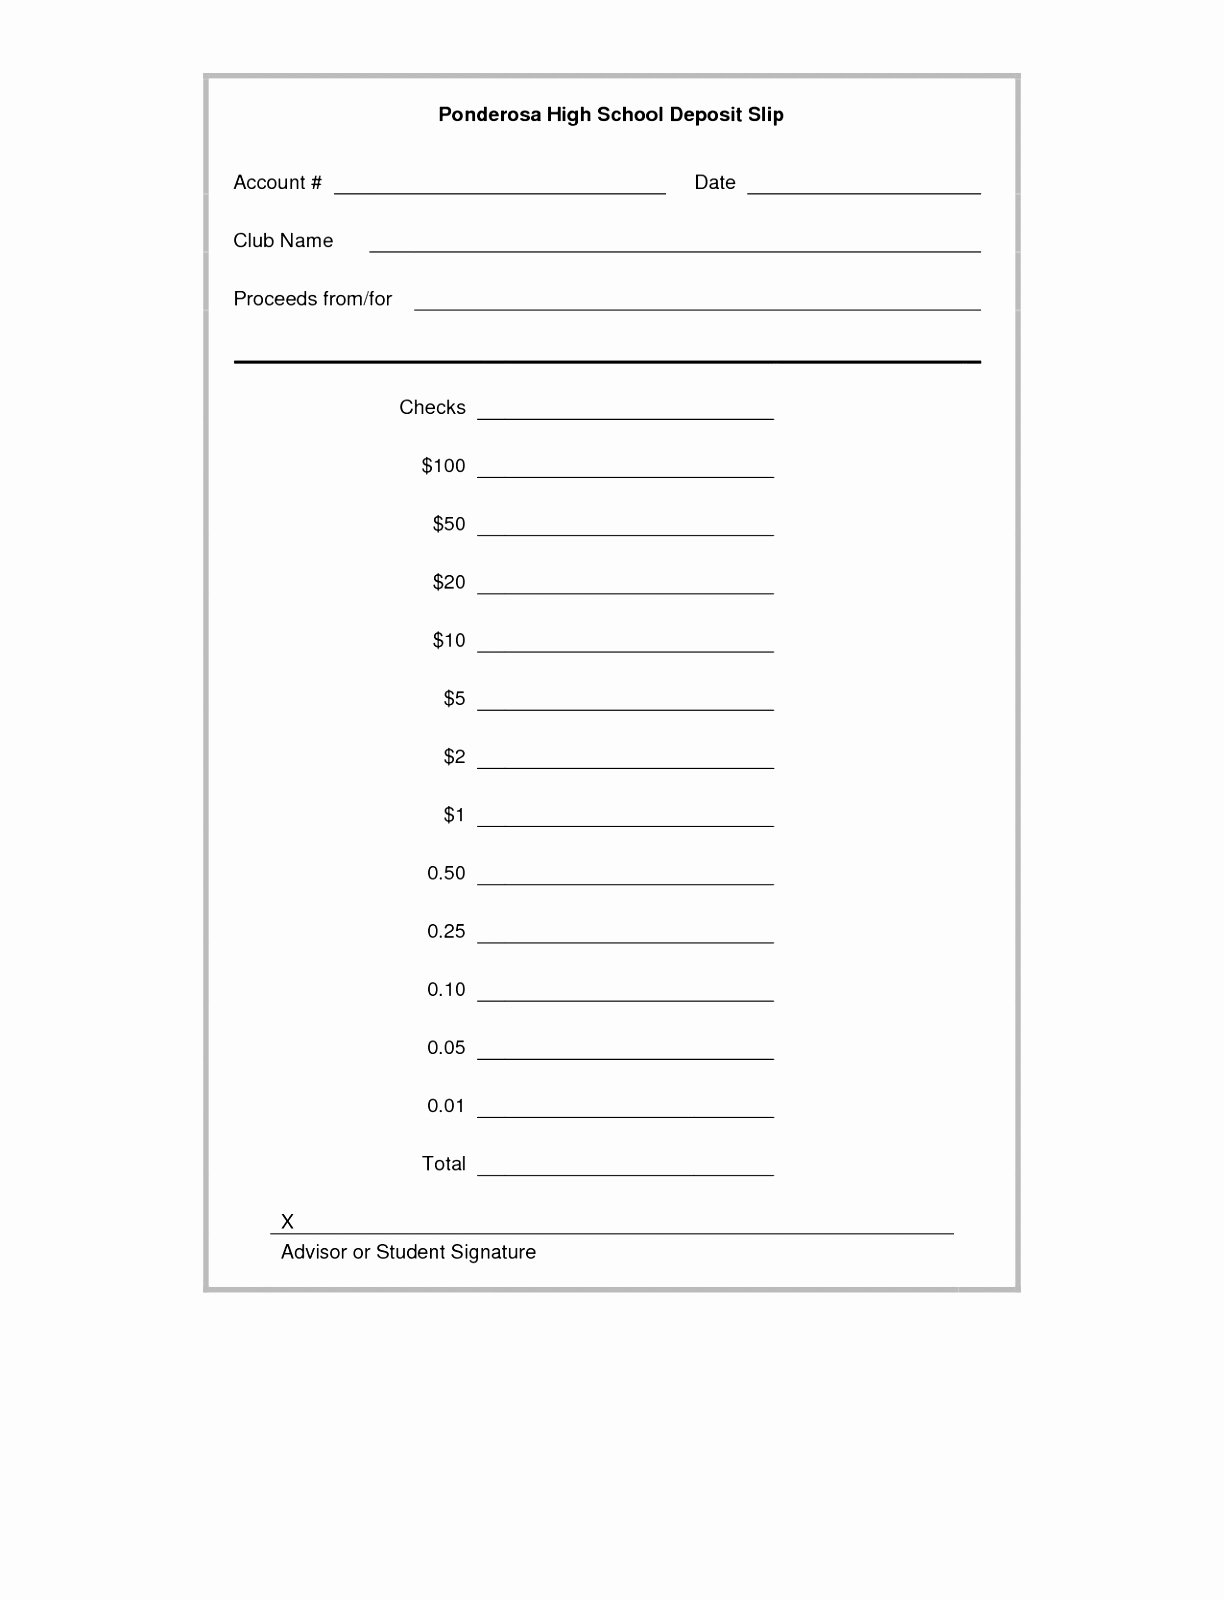 Bank Change order form Template Awesome 7 Bank Change order form Template Yprot